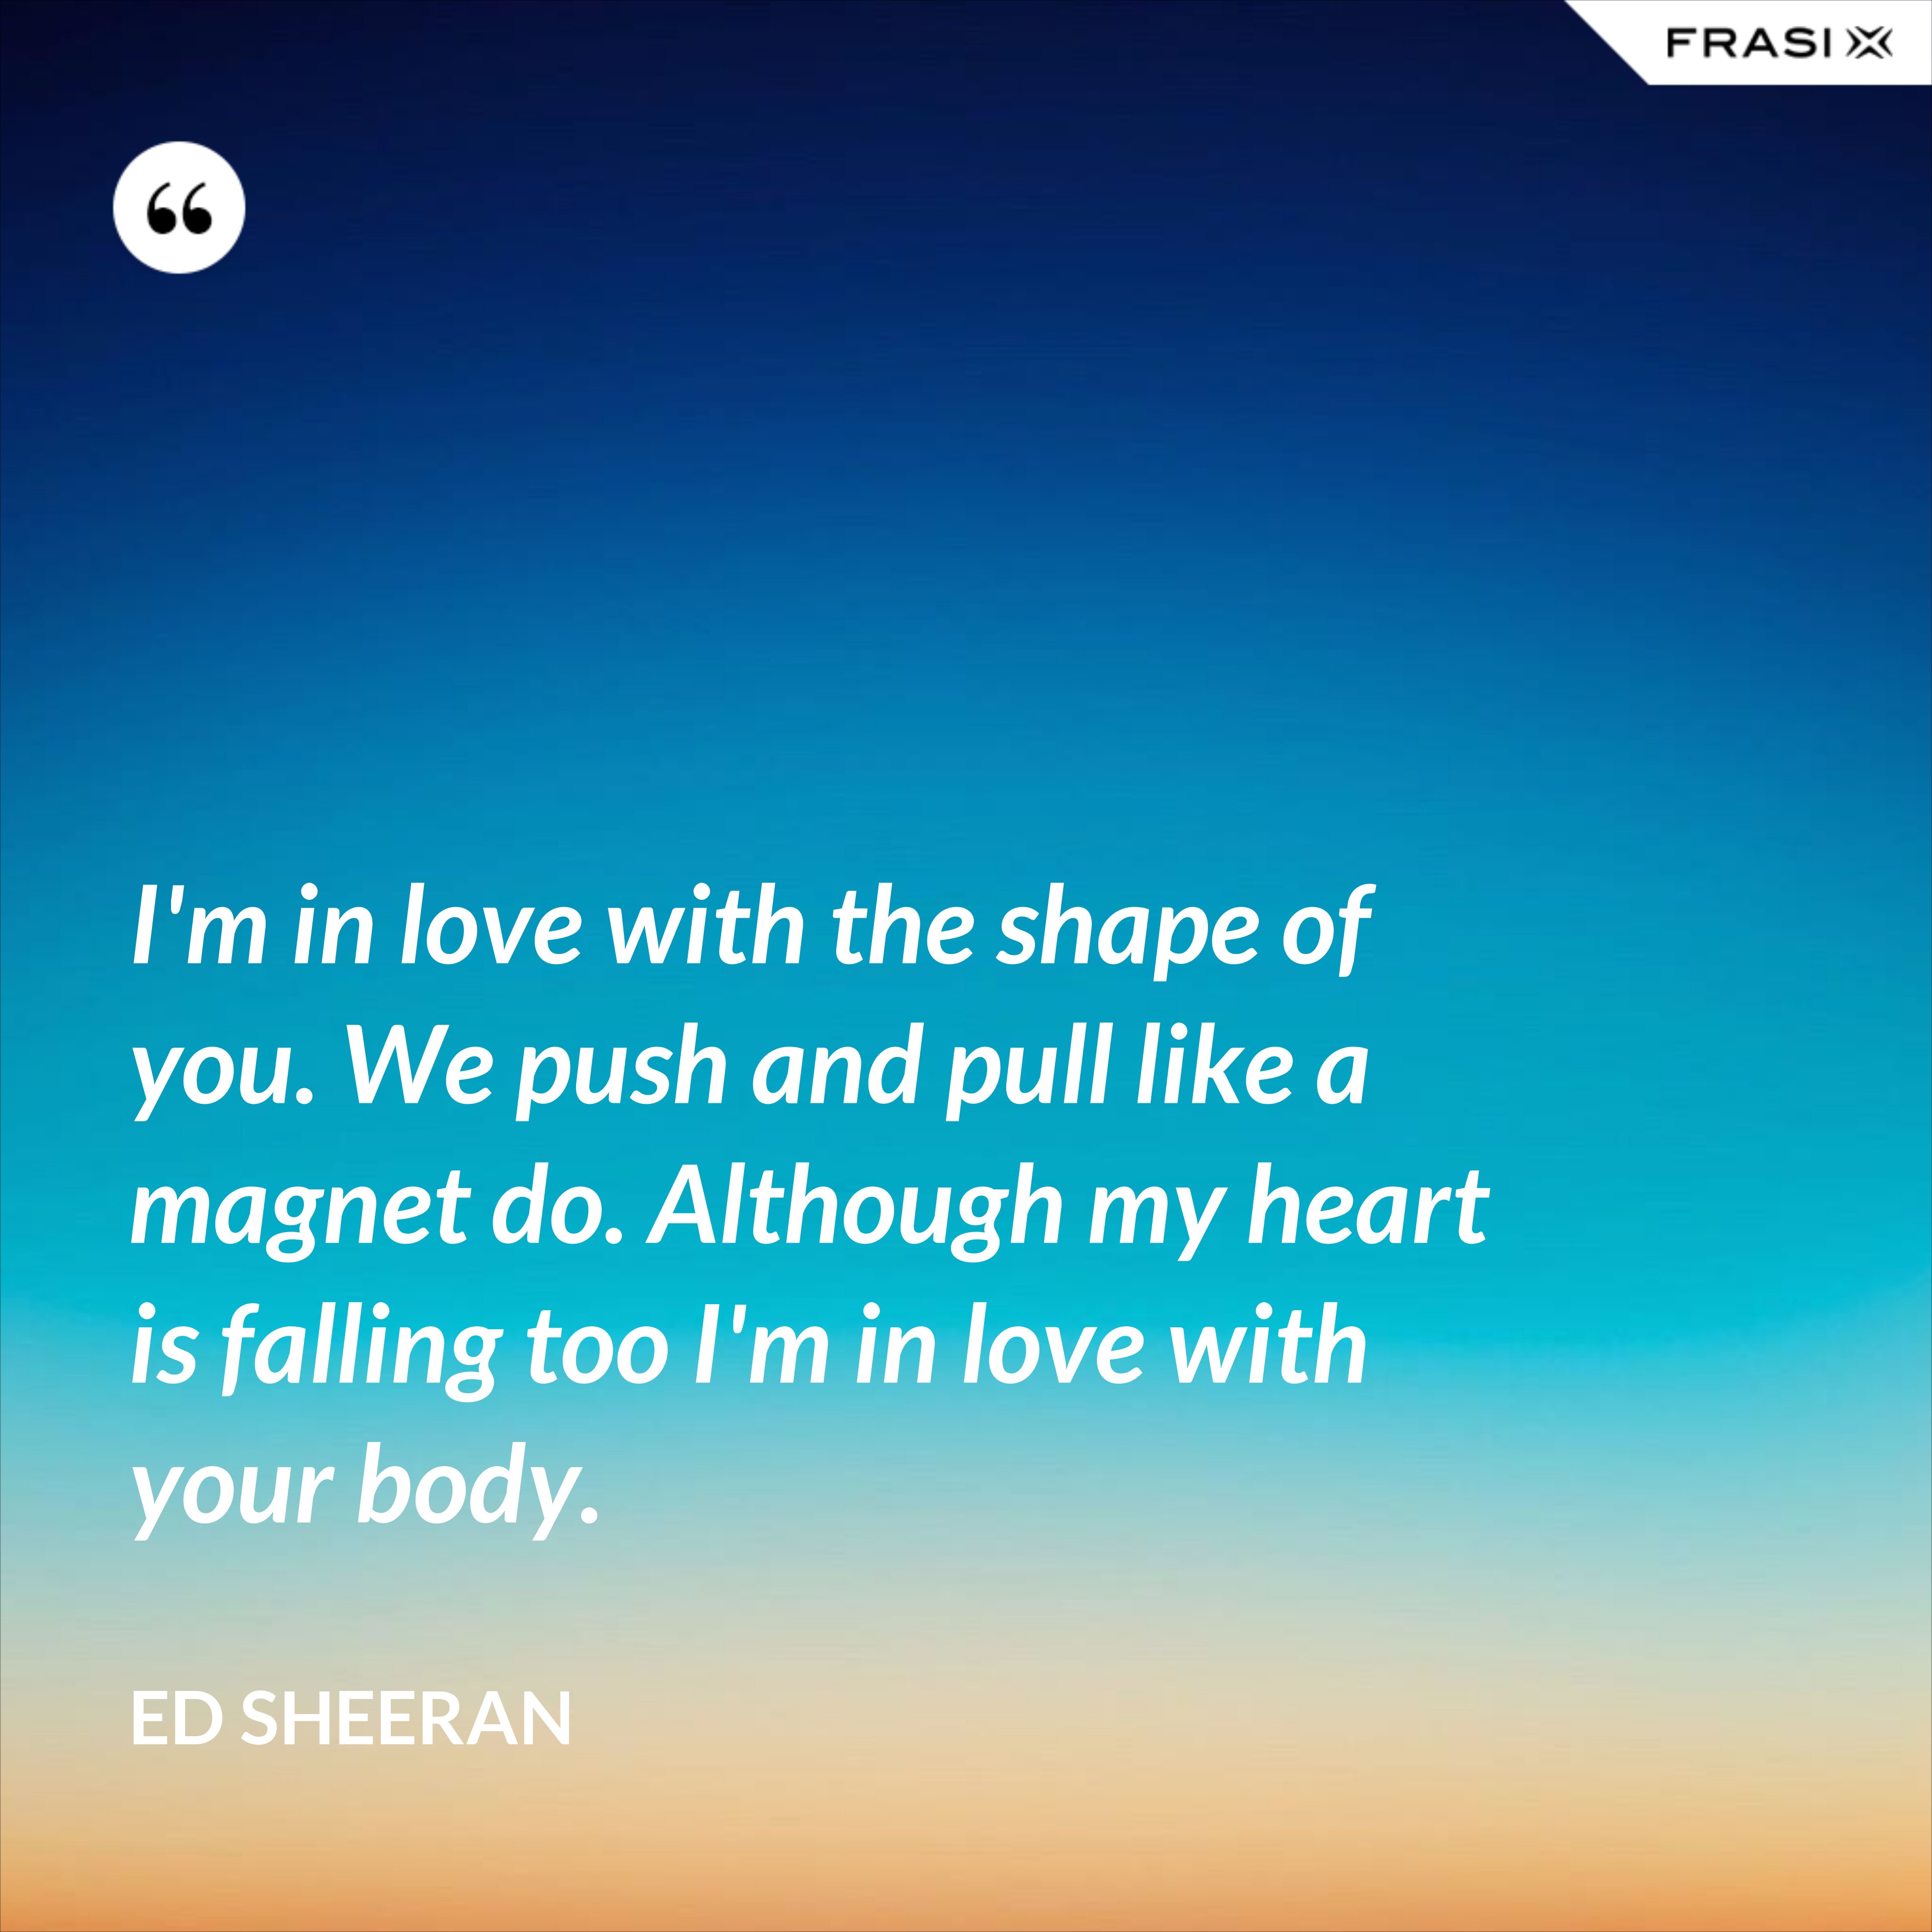 I'm in love with the shape of you. We push and pull like a magnet do. Although my heart is falling too I'm in love with your body. - Ed Sheeran